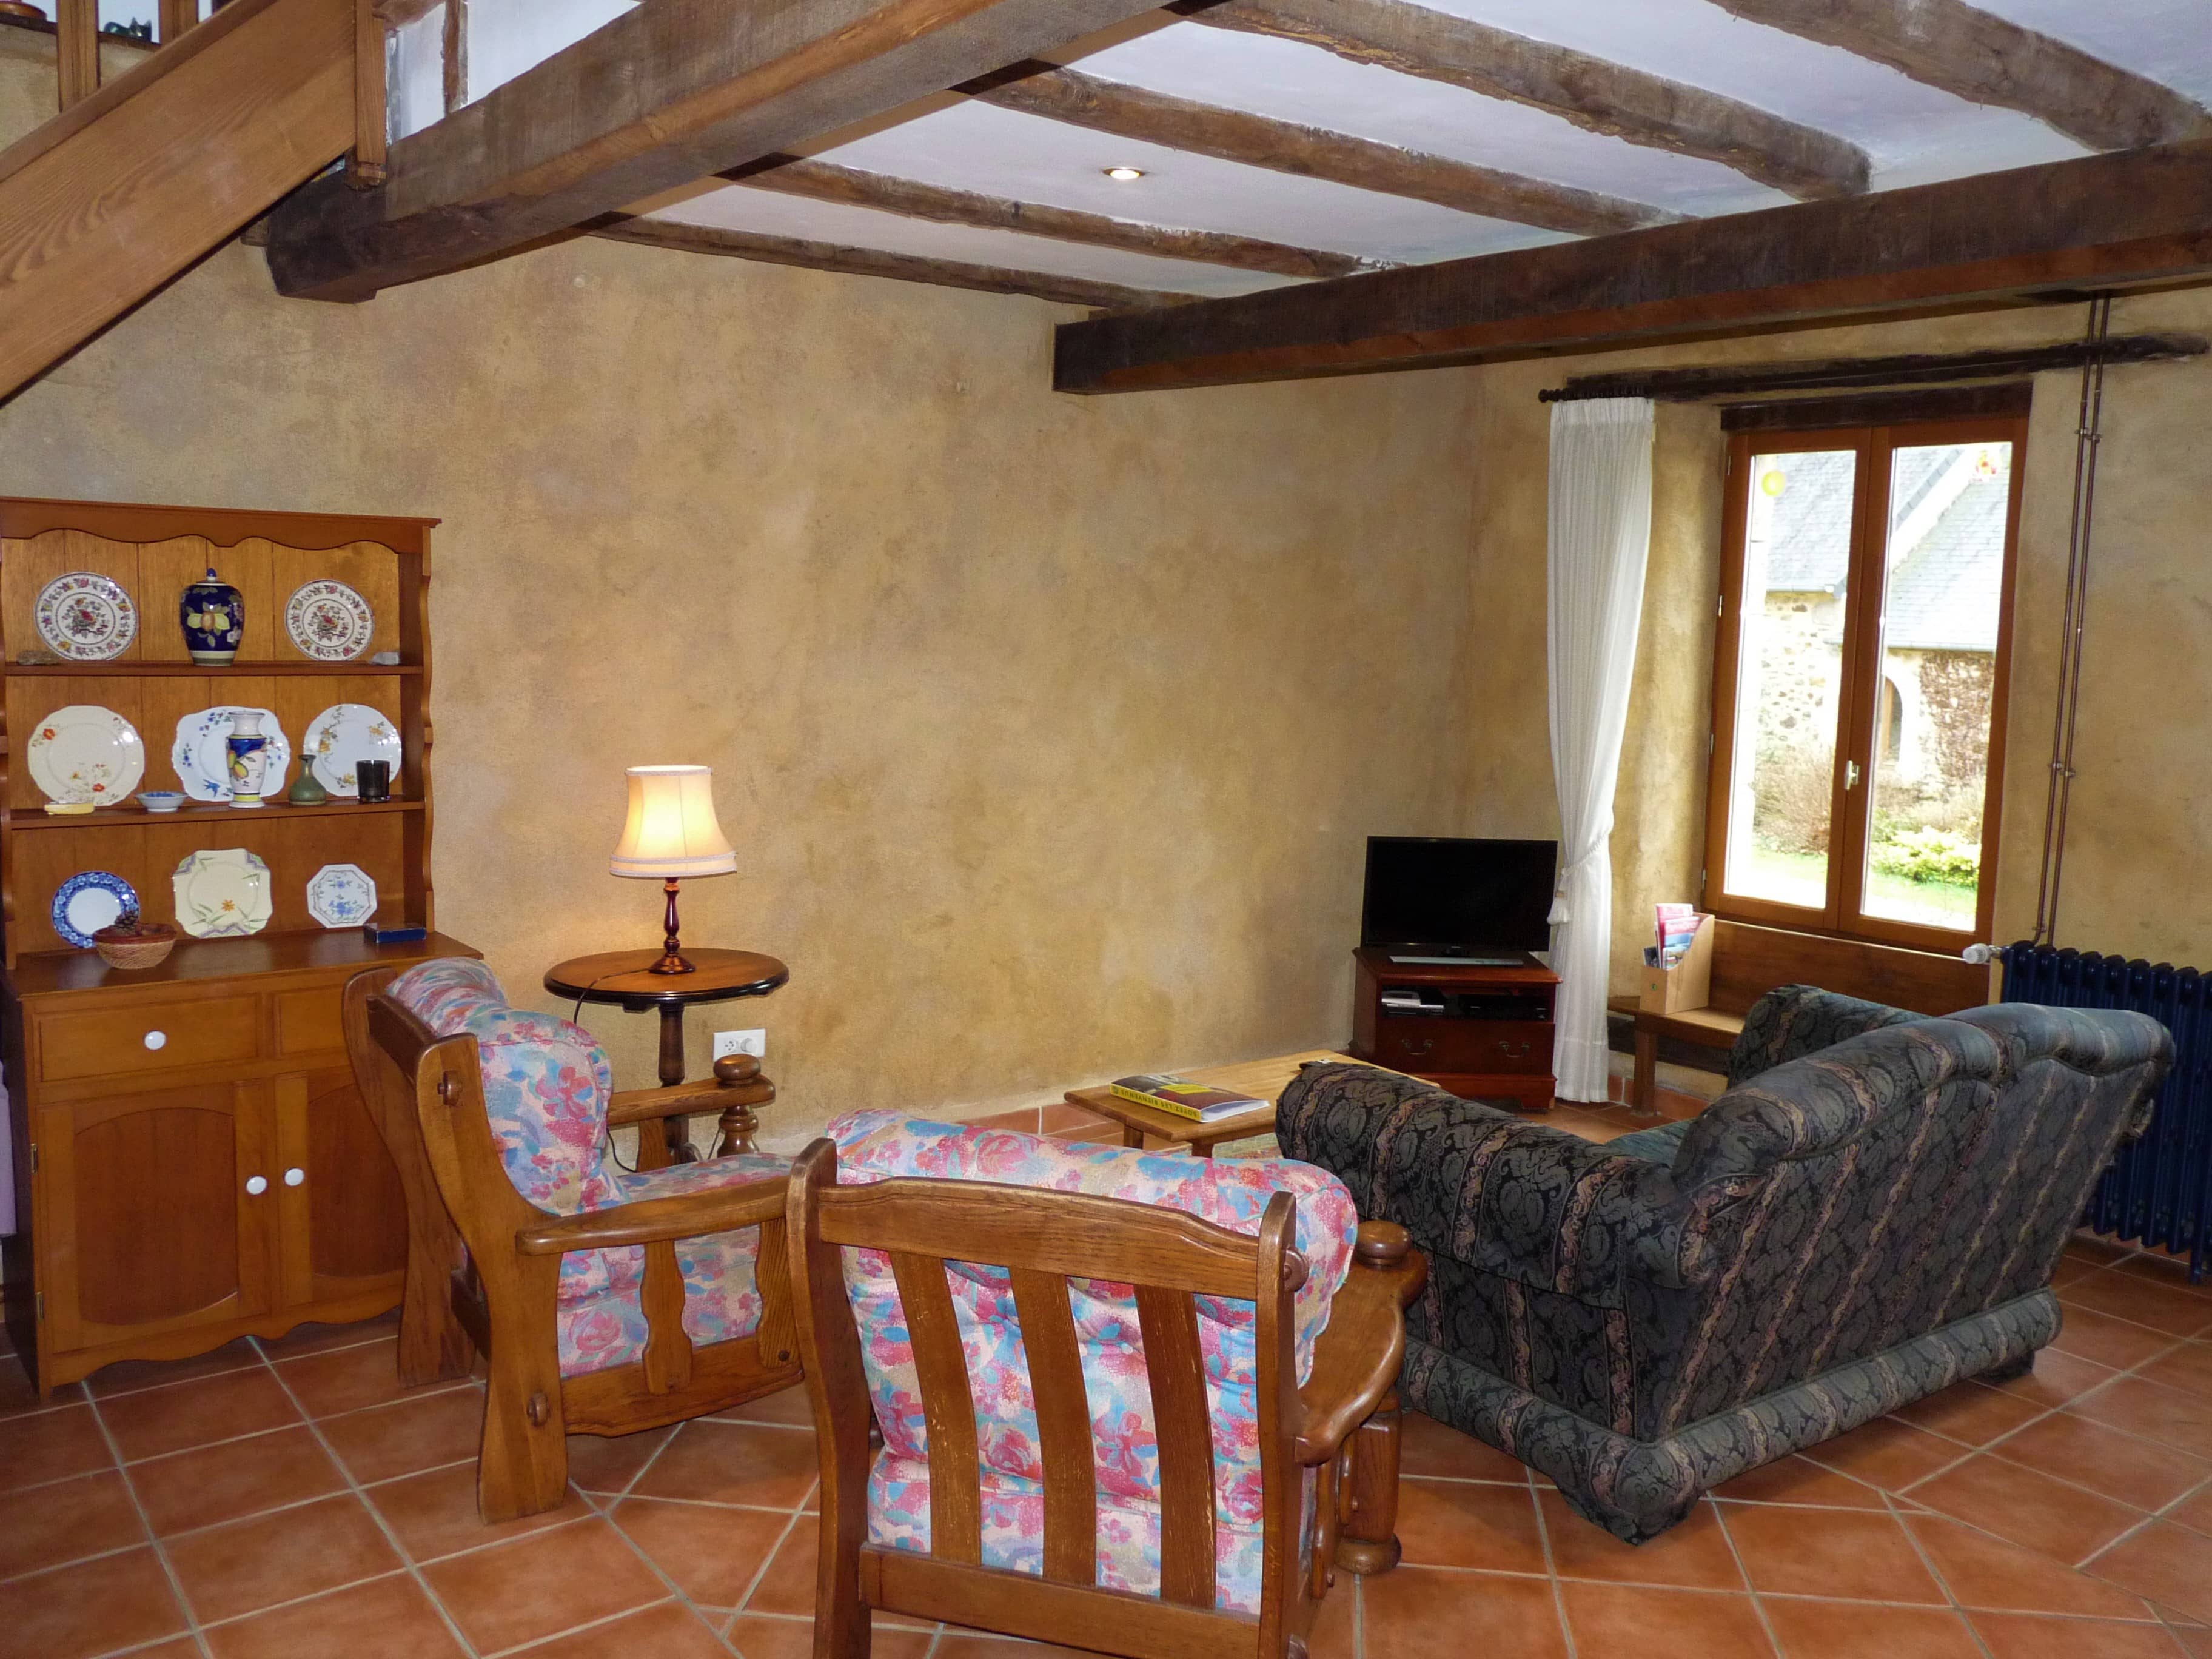 Comfortable living room of La Julerie cottage in Brittany, France, with a view of the surrounding nature and equipped with modern furniture. Ideal for relaxing after a day of sightseeing in Brittany.